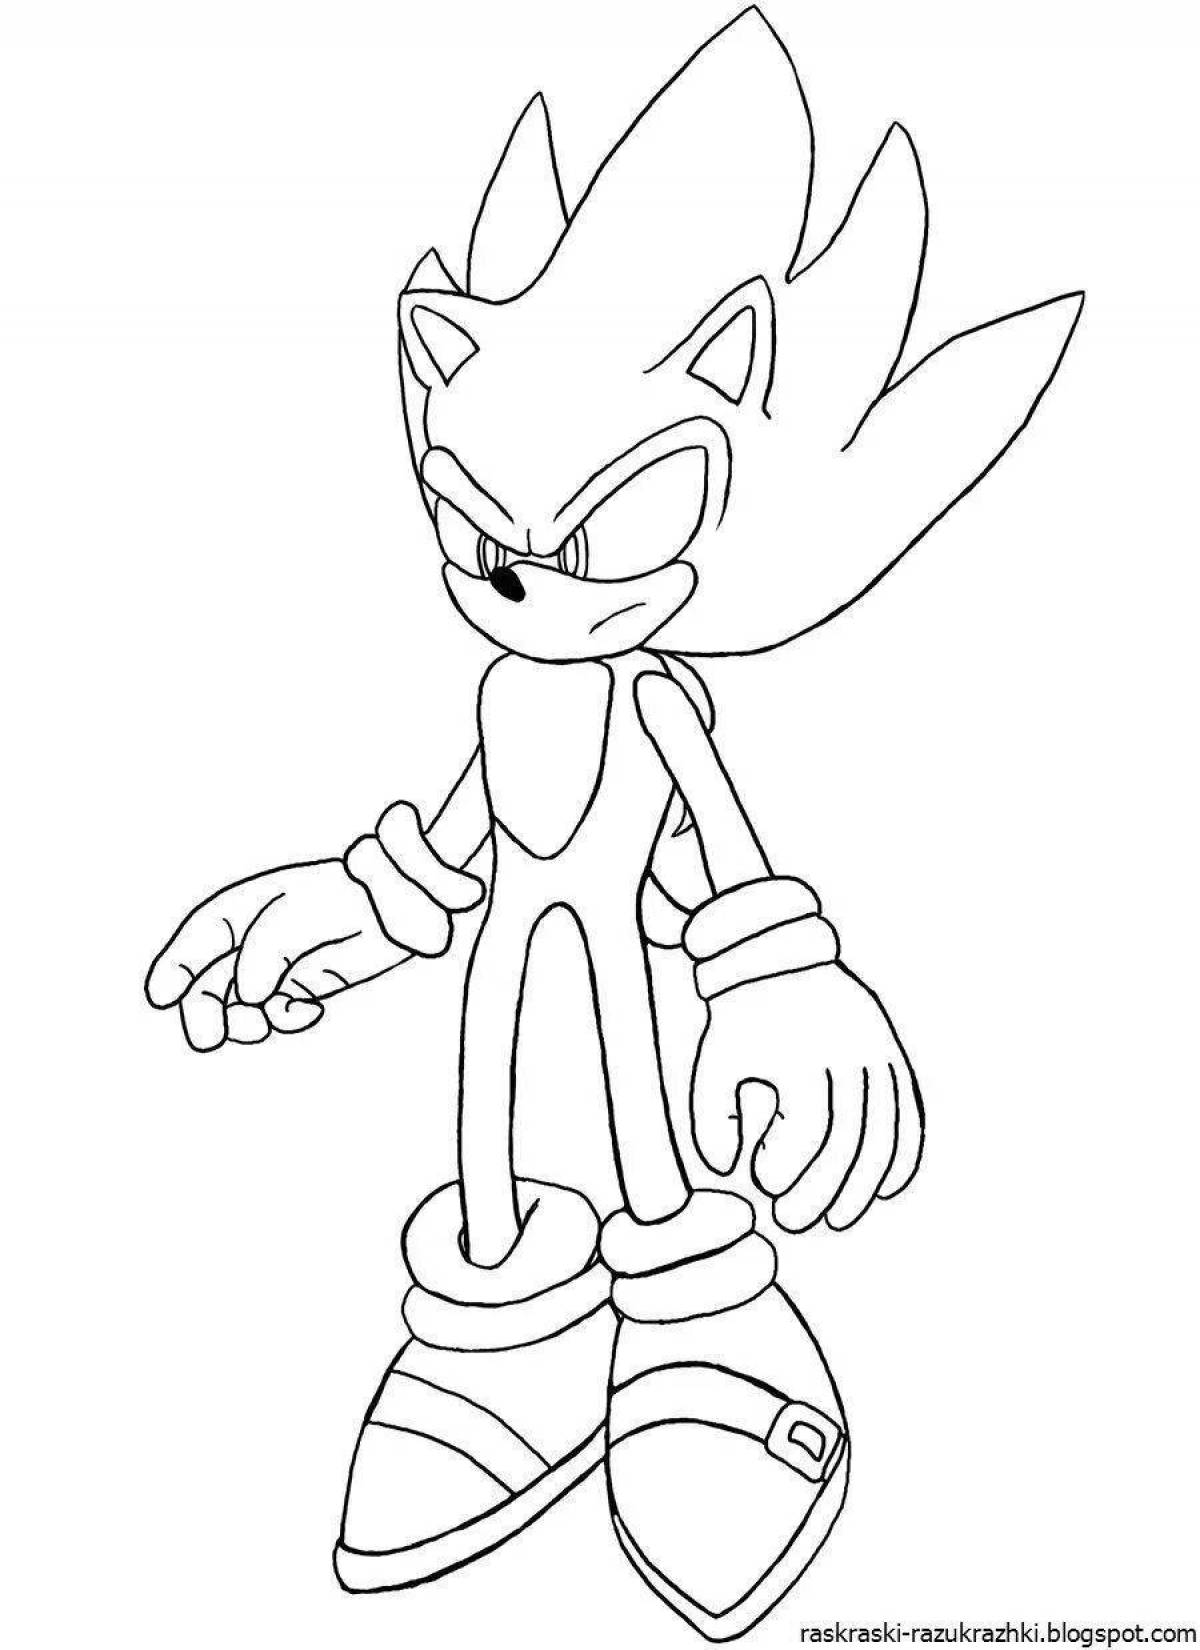 Charming sonic light coloring book